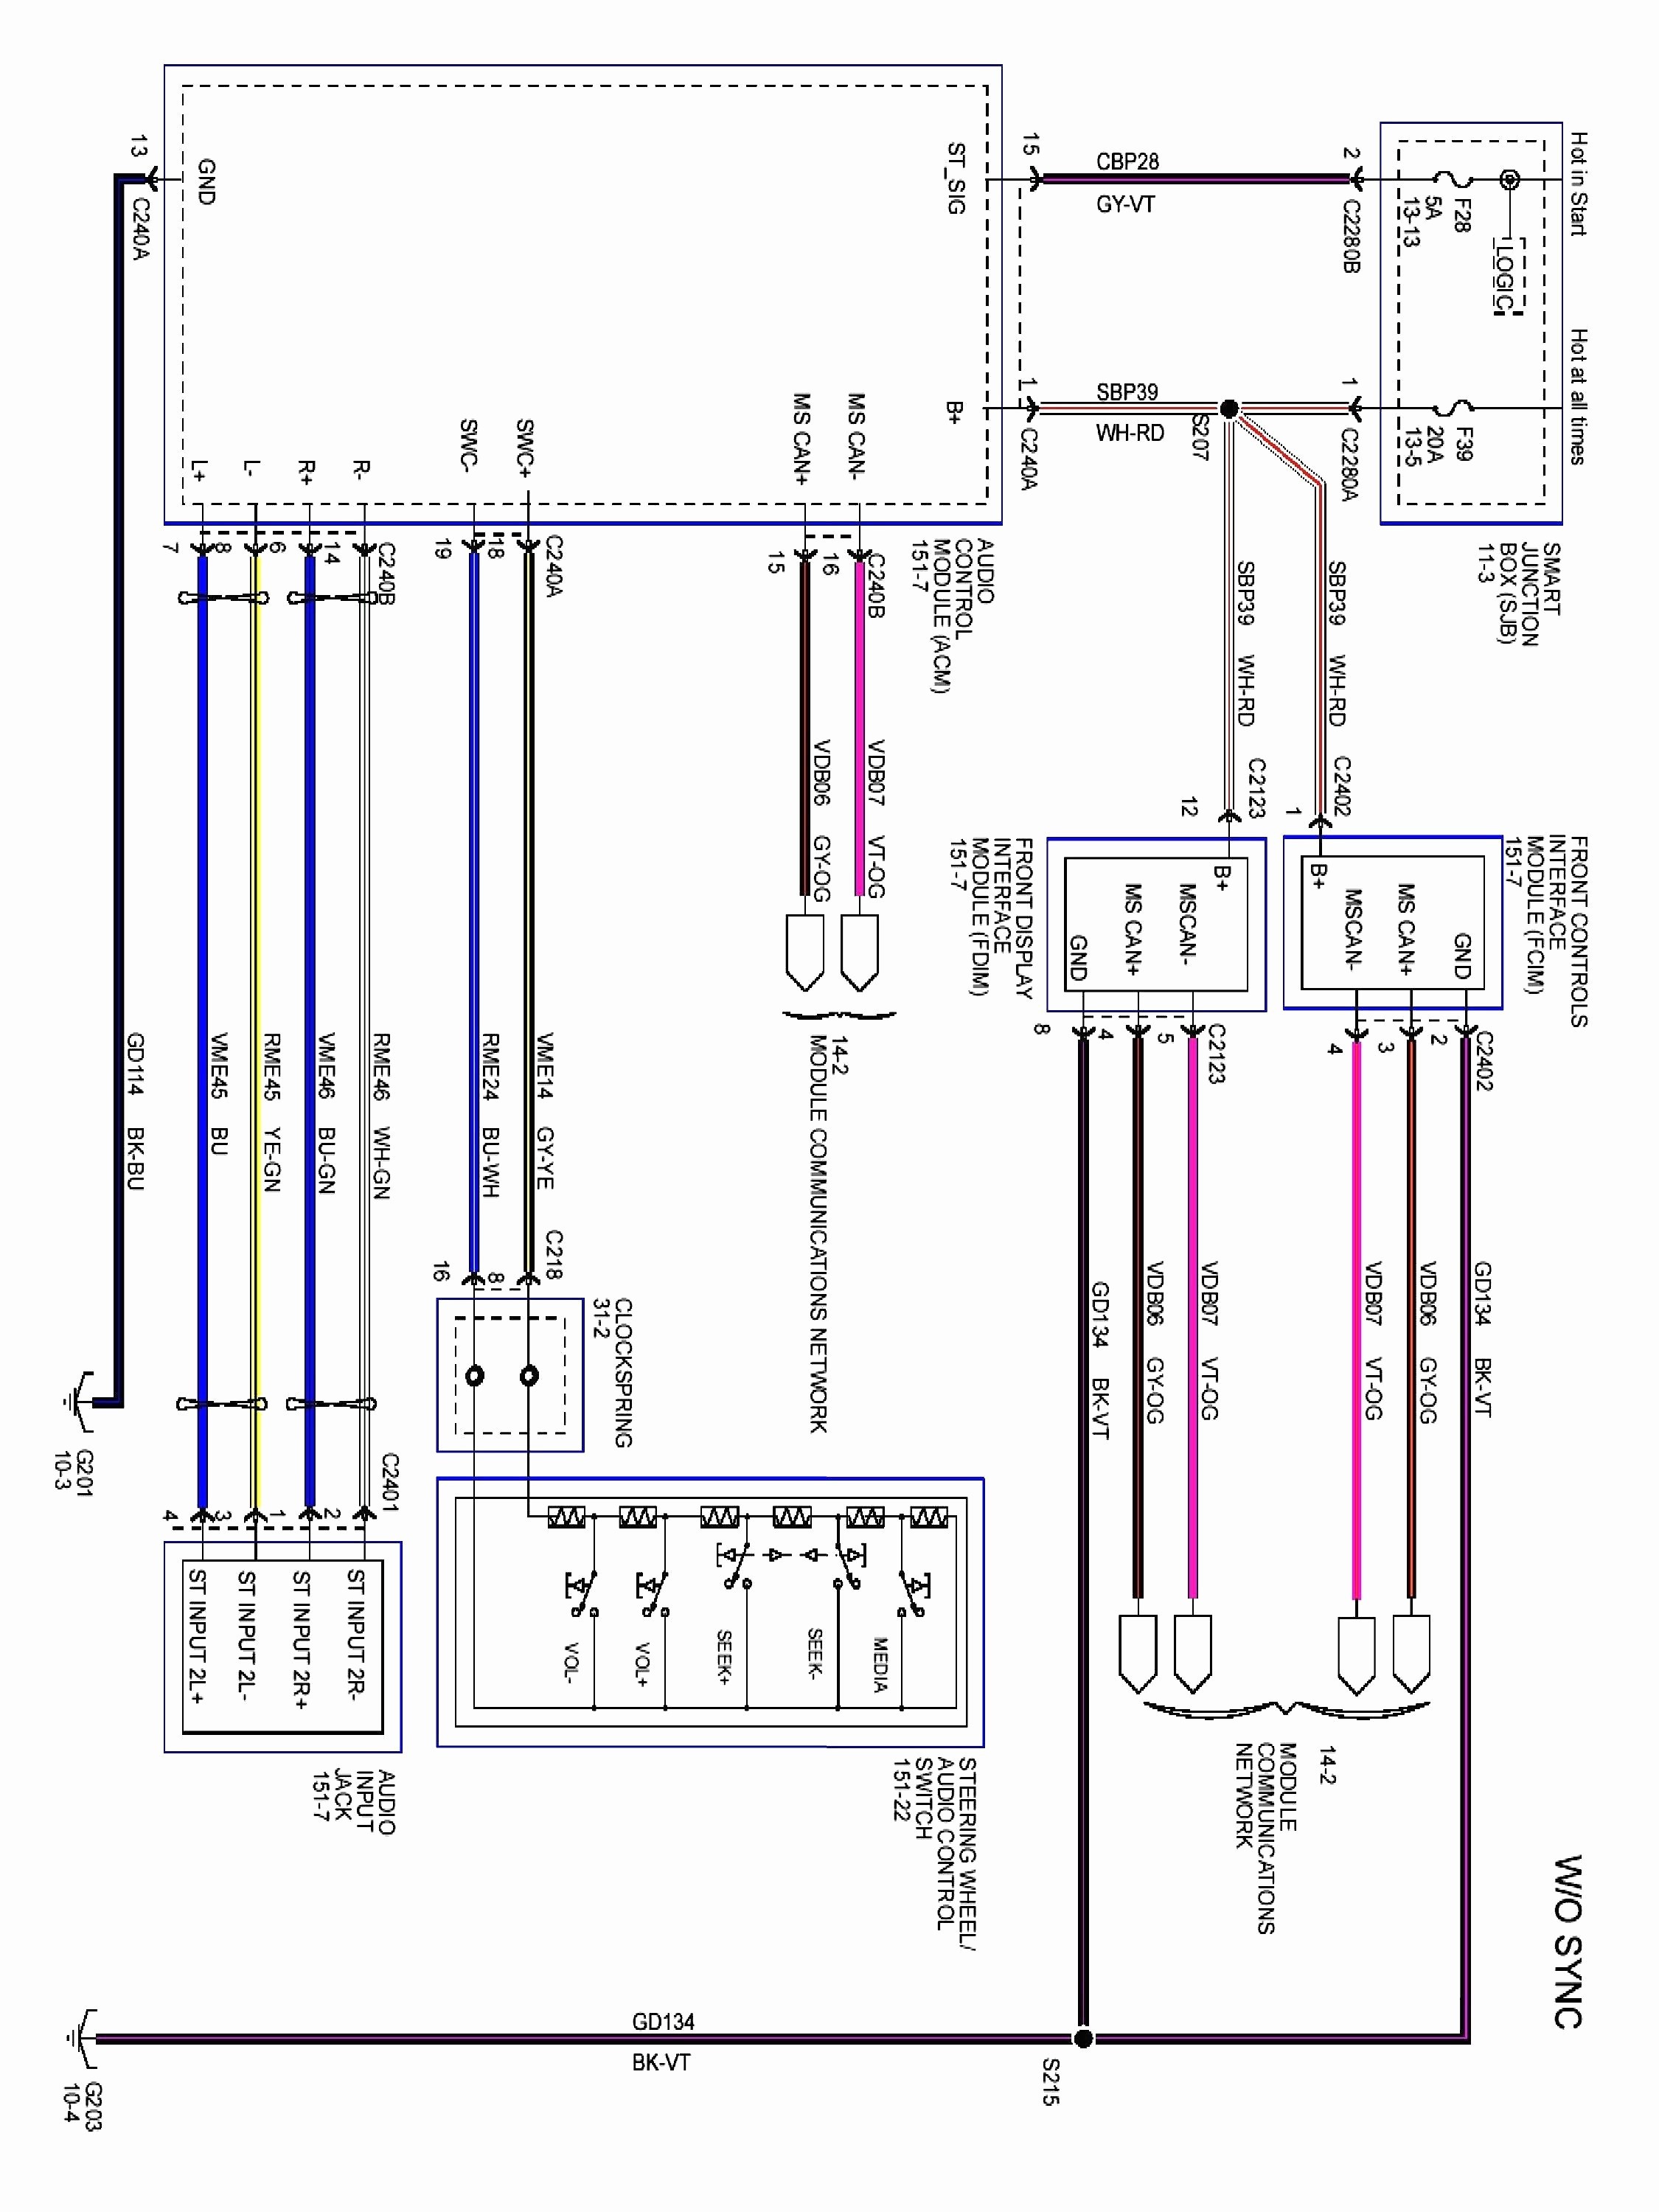 Car Radio Wiring Diagram How to Wire Speakers to Amp Diagram New Wiring Clean Od Dpdt toggle Of Car Radio Wiring Diagram